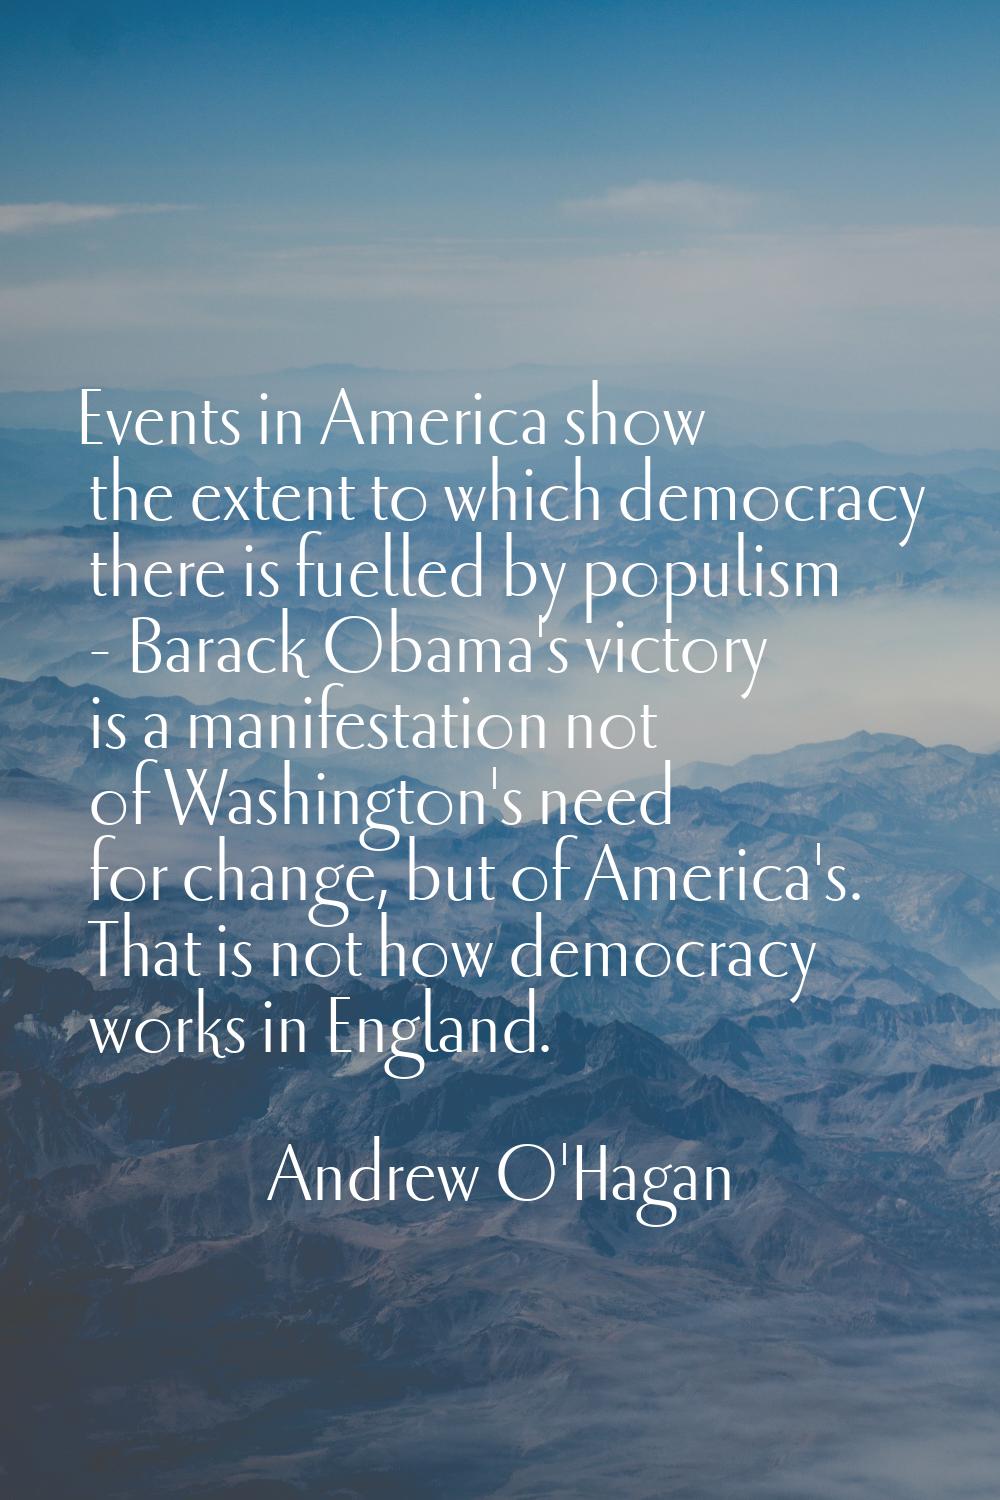 Events in America show the extent to which democracy there is fuelled by populism - Barack Obama's 